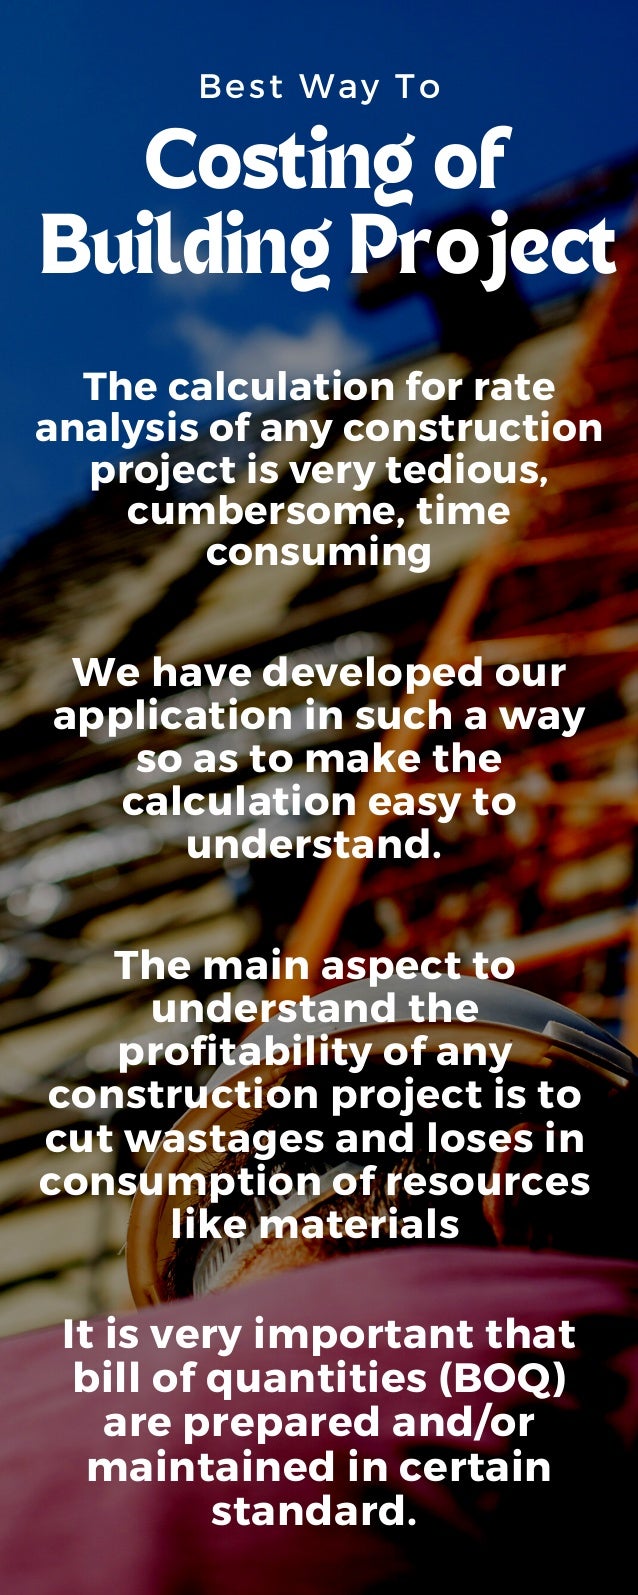 Best Way To
Costing of
Building Project
We have developed our
application in such a way
so as to make the
calculation easy to
understand.
The calculation for rate
analysis of any construction
project is very tedious,
cumbersome, time
consuming
The main aspect to
understand the
profitability of any
construction project is to
cut wastages and loses in
consumption of resources
like materials
It is very important that
bill of quantities (BOQ)
are prepared and/or
maintained in certain
standard.
 